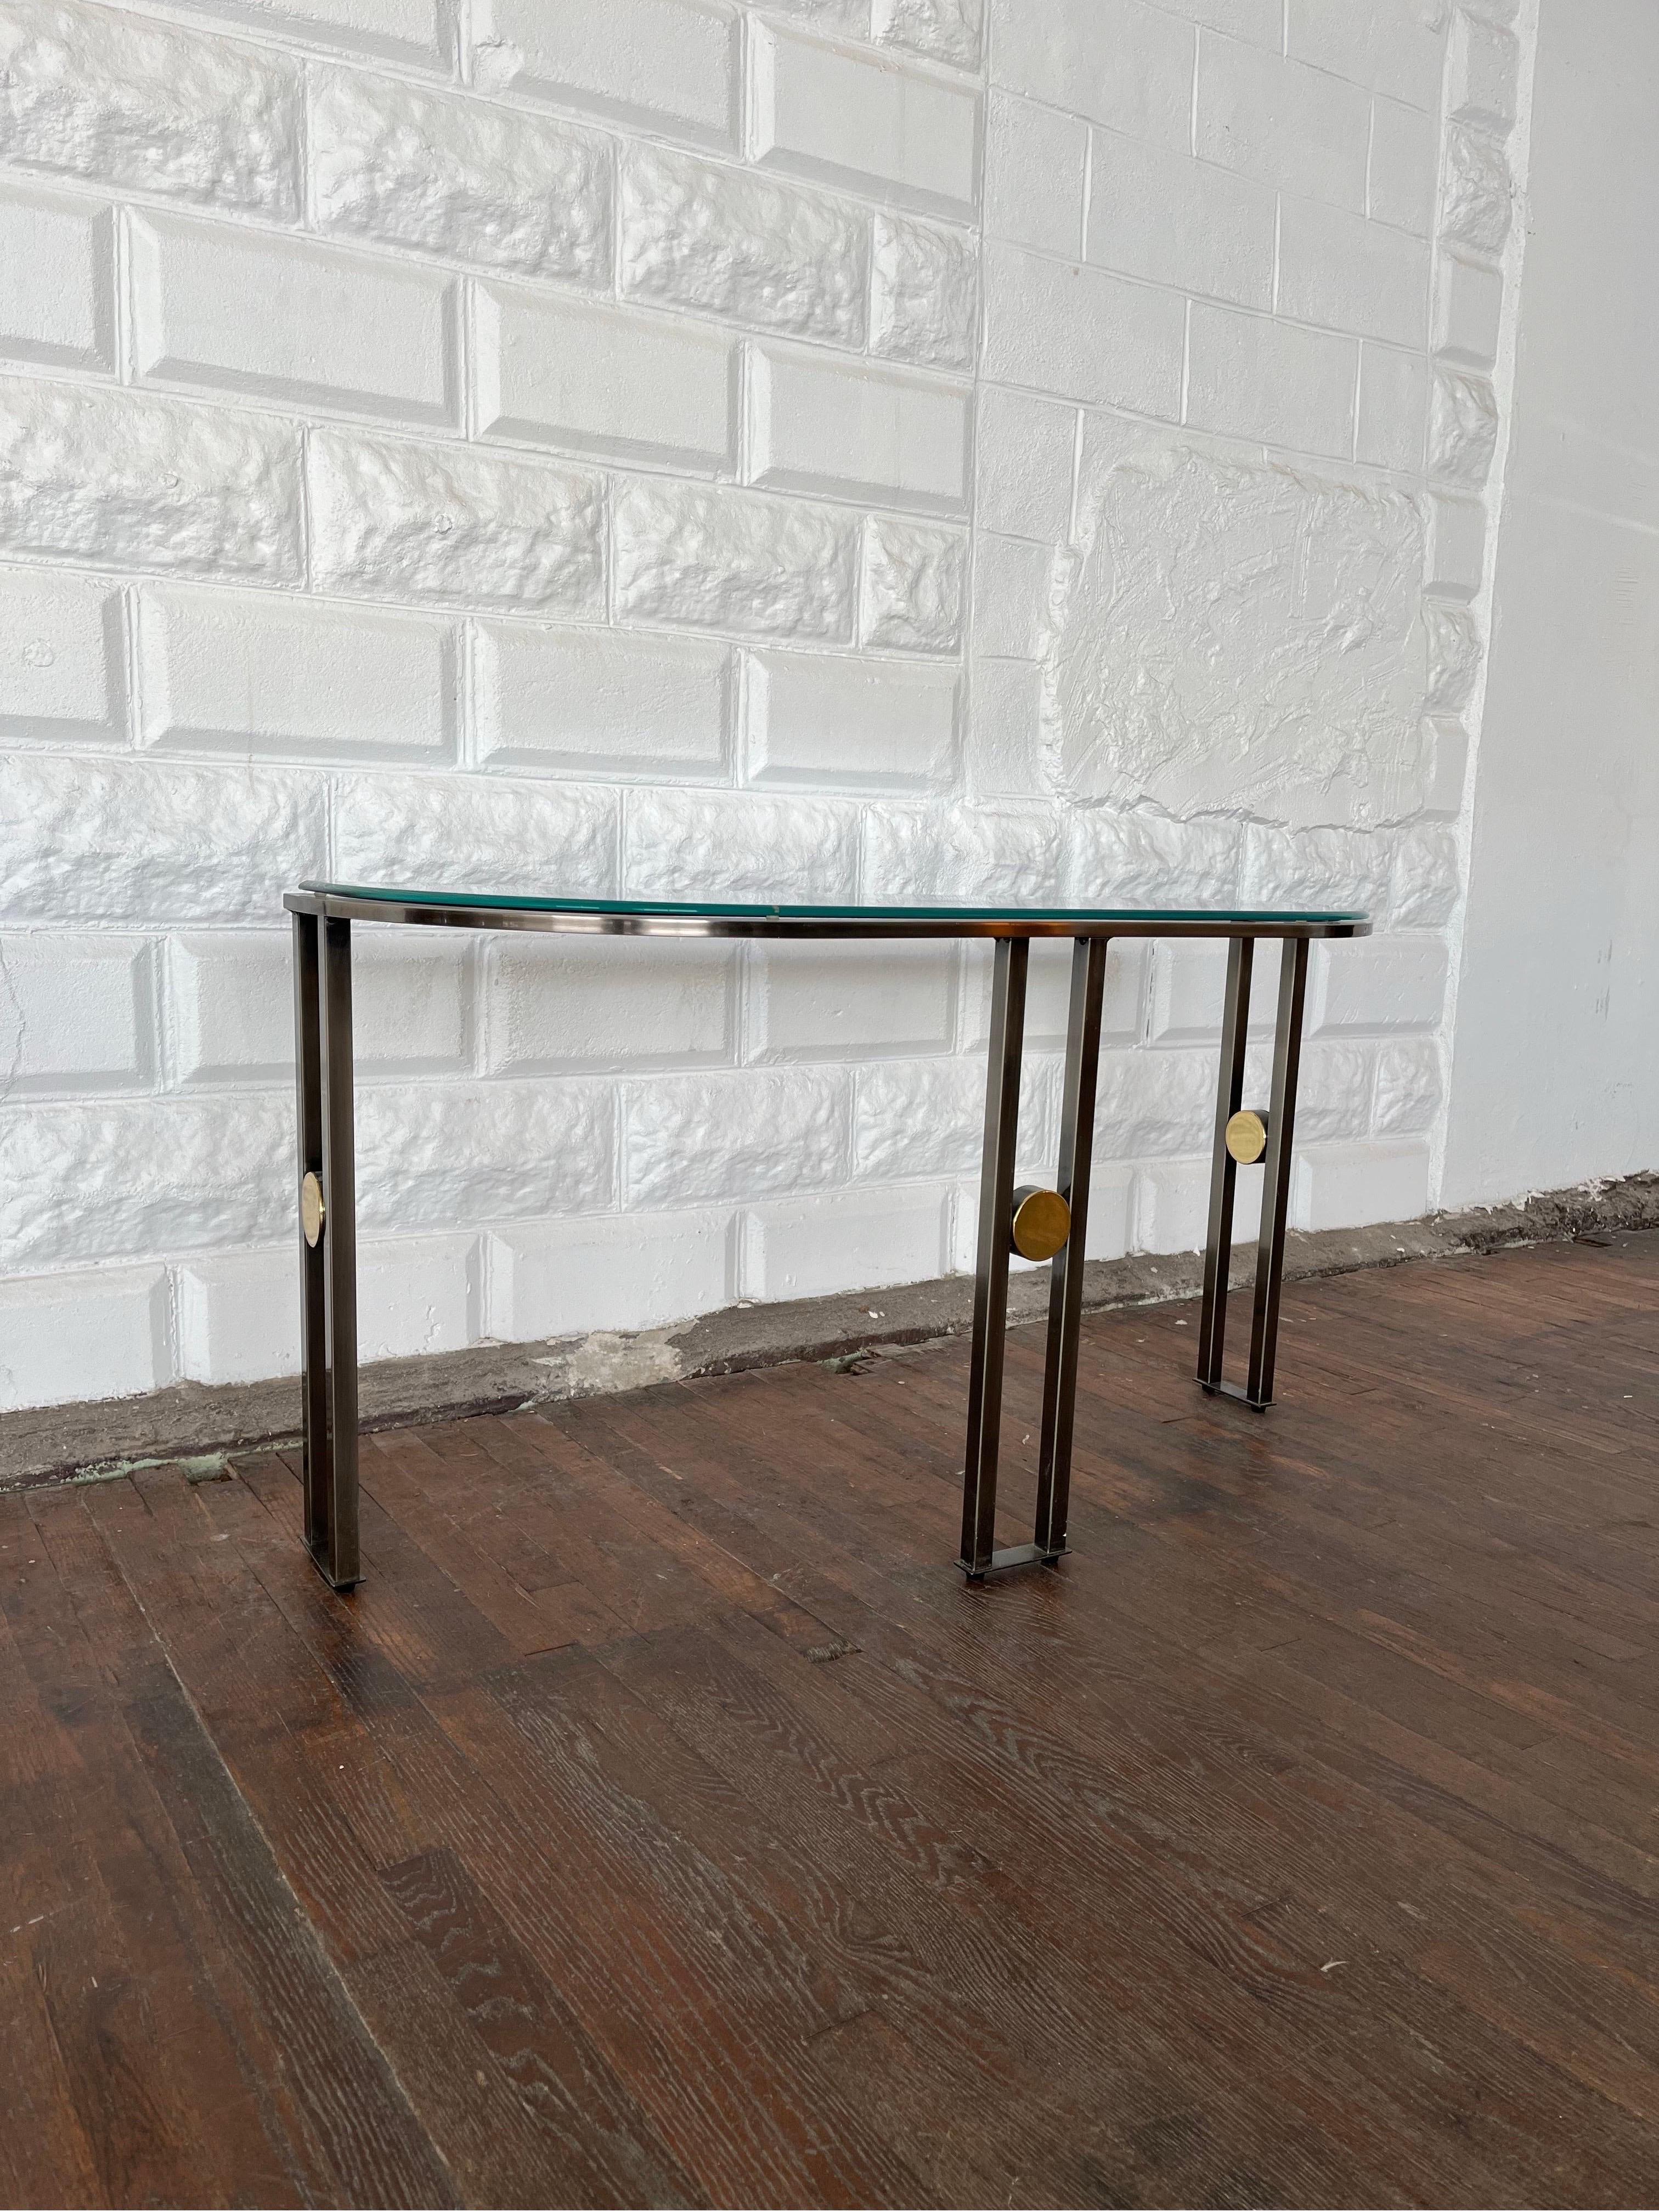 Fantastic Art Deco Revival Demilune Console or Sofa Table by Design Institute Ameria(DIA). Brushed chrome frame offset with brass medallions. Beveled glass top with OG edge. Truly wonderful lines with simplicity that packs a punch.
Curbside to